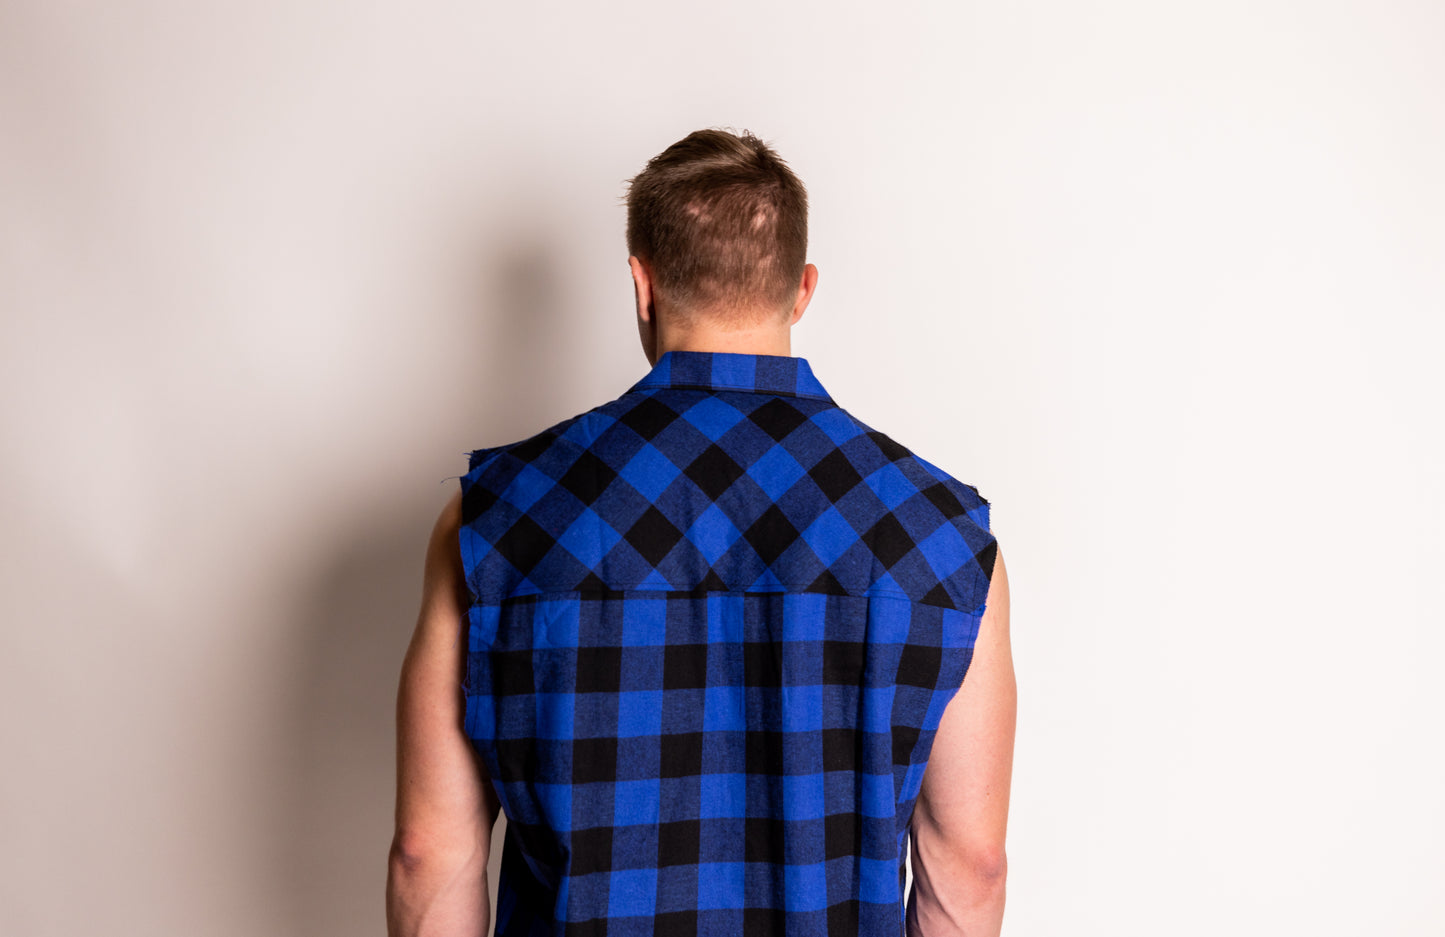 Special Edition Flannel Plaid Sleeveless Shirt